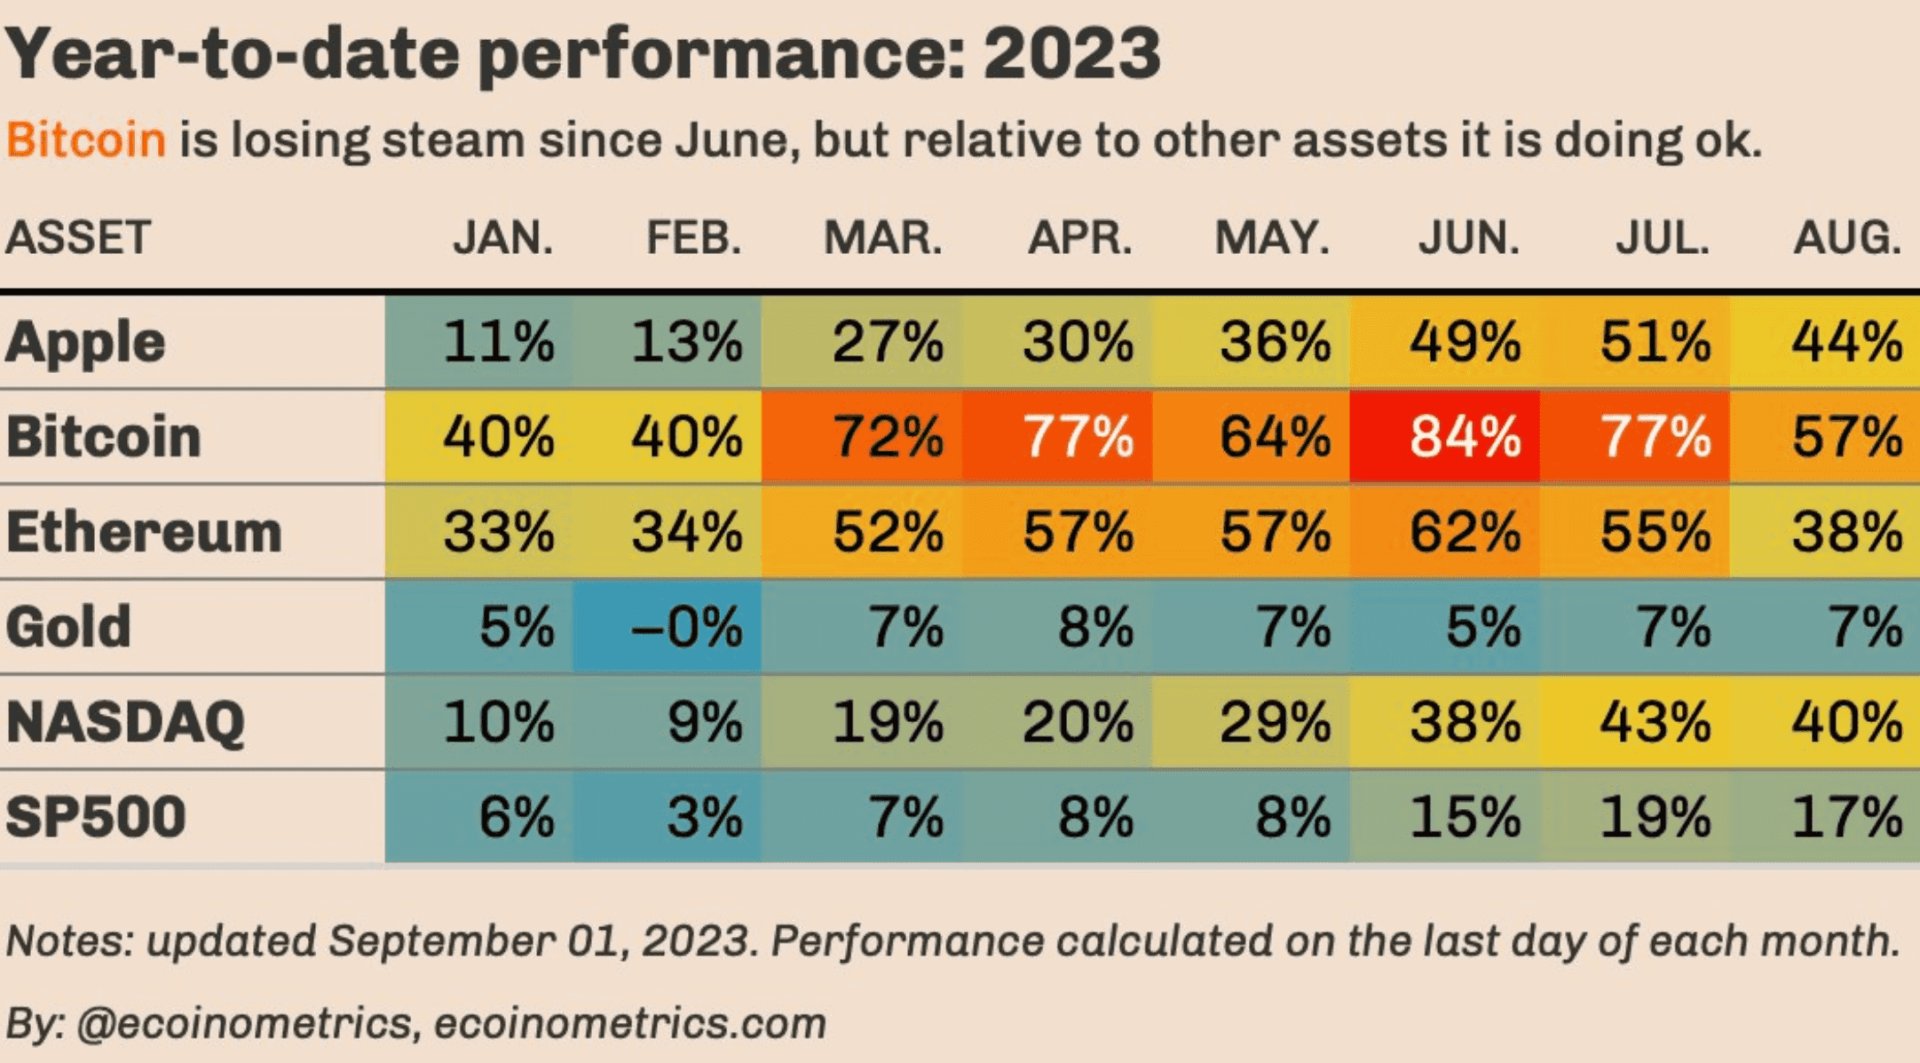 Bitcoin is the best performing asset since the beginning of the year despite the recent fall - September 6, 2023. 